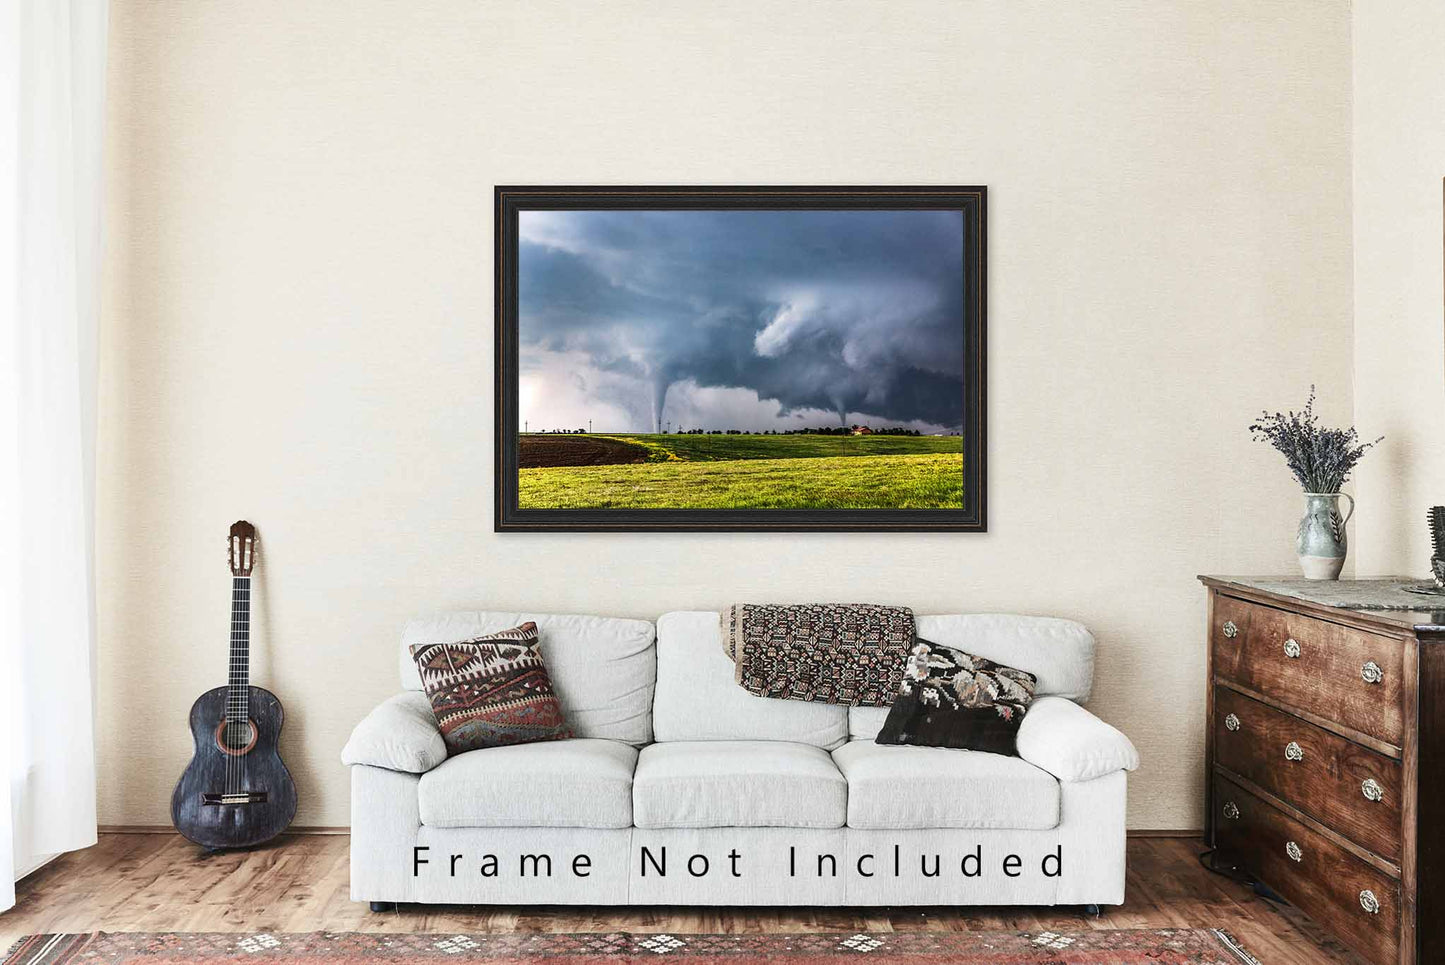 Tornado Photography Print (Not Framed) Picture of Two Tornadoes at Same Time on Stormy Spring Day in Kansas Storm Wall Art Nature Decor